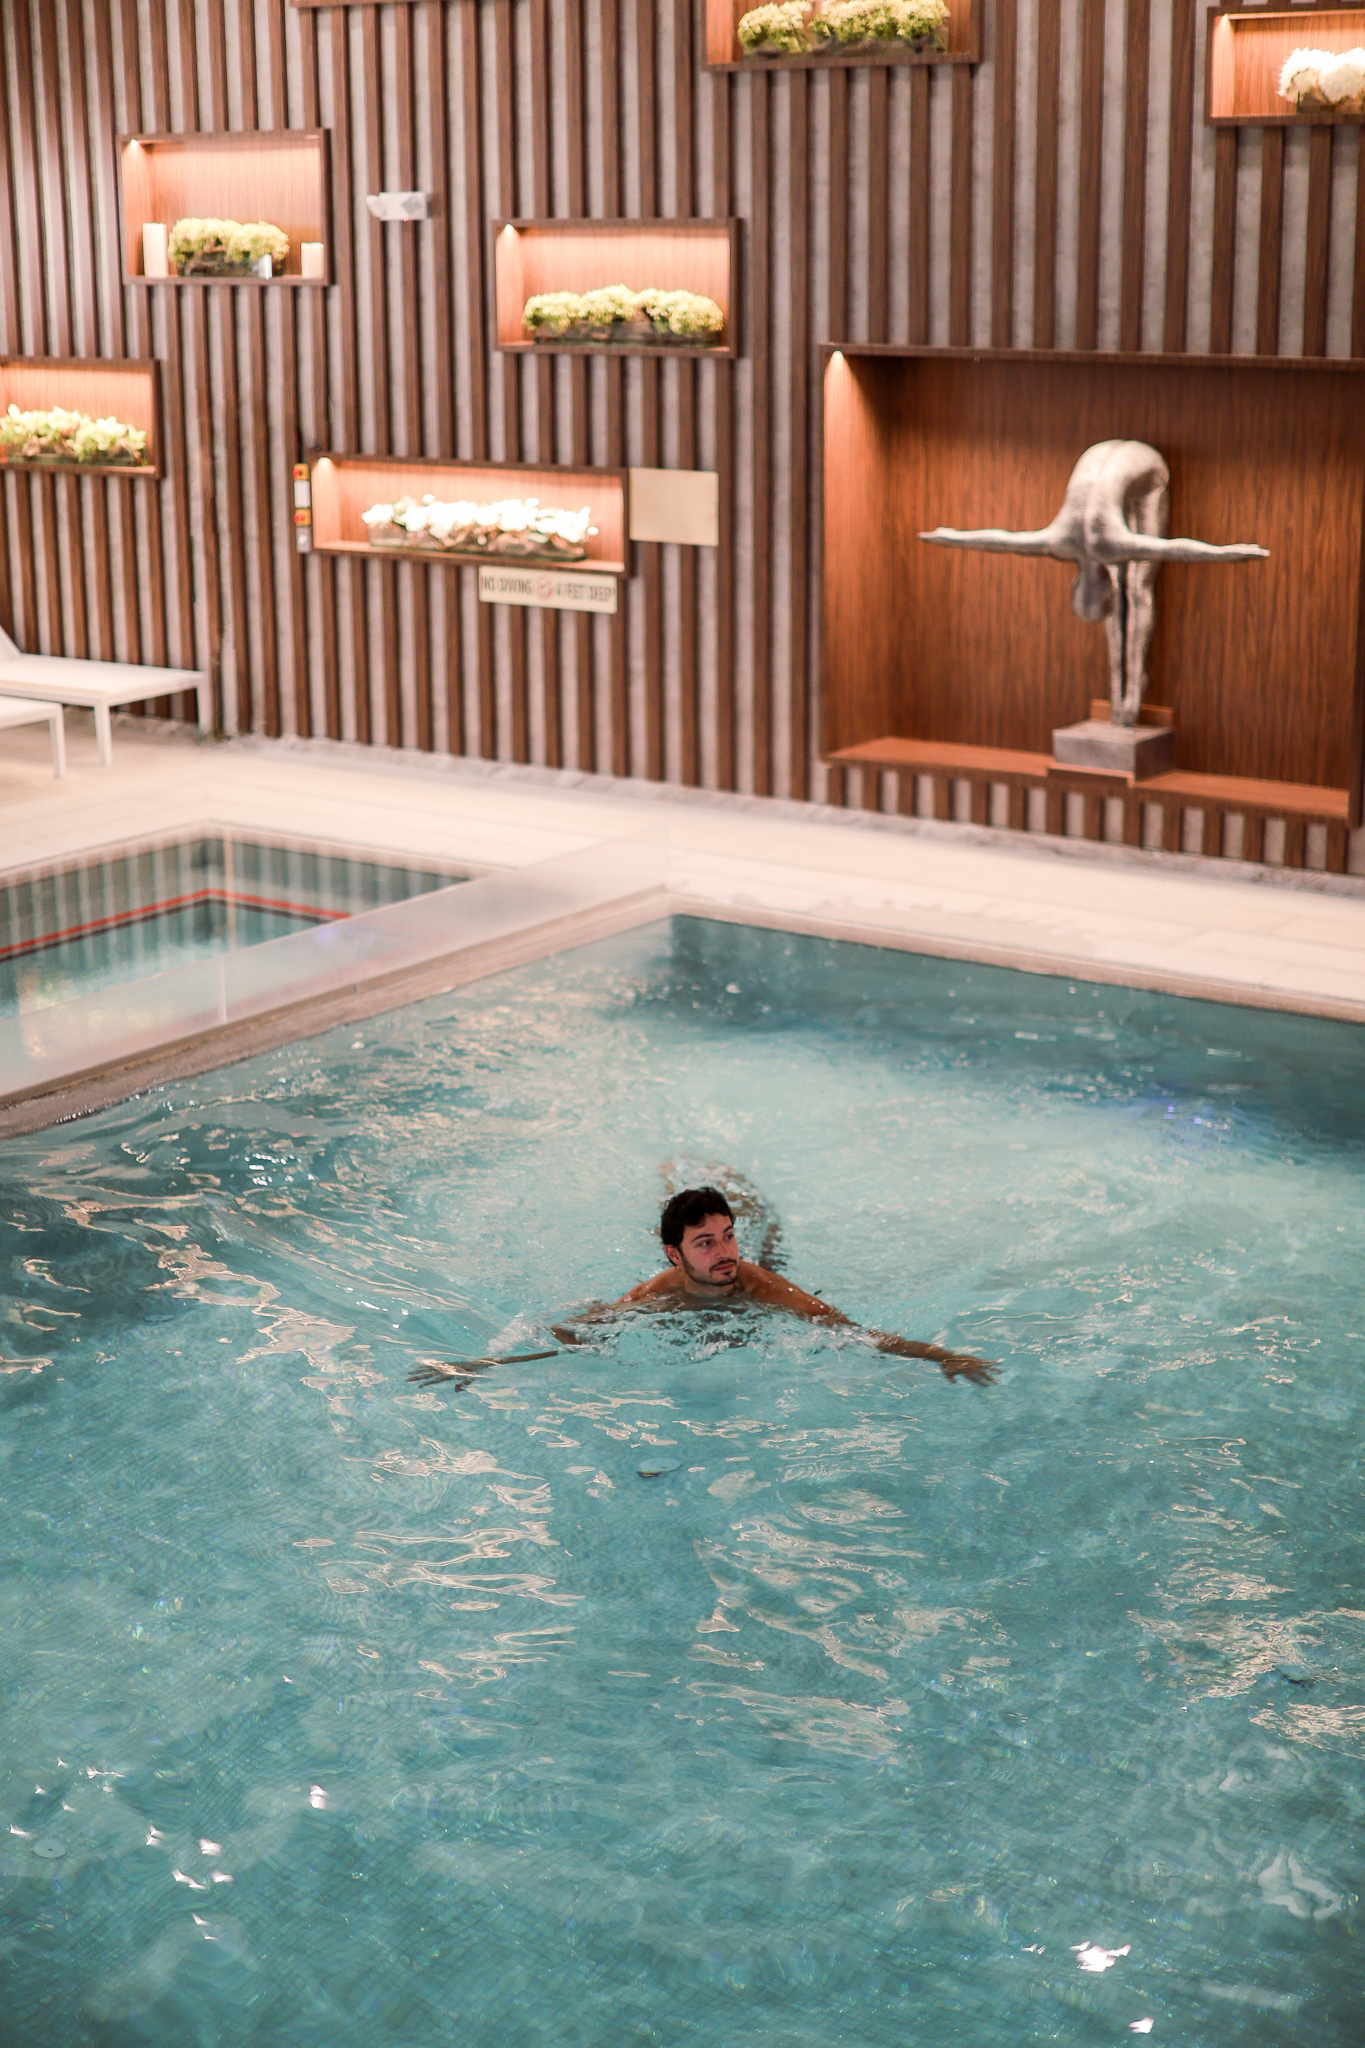 A person is floating in a clear, blue swimming pool. They have a relaxed posture with arms spread out. The pool is indoors, and the surrounding area features wooden walls with decorative plants and a sculpture. There is a sign on the wall indicating 'No Diving, Shallow Water